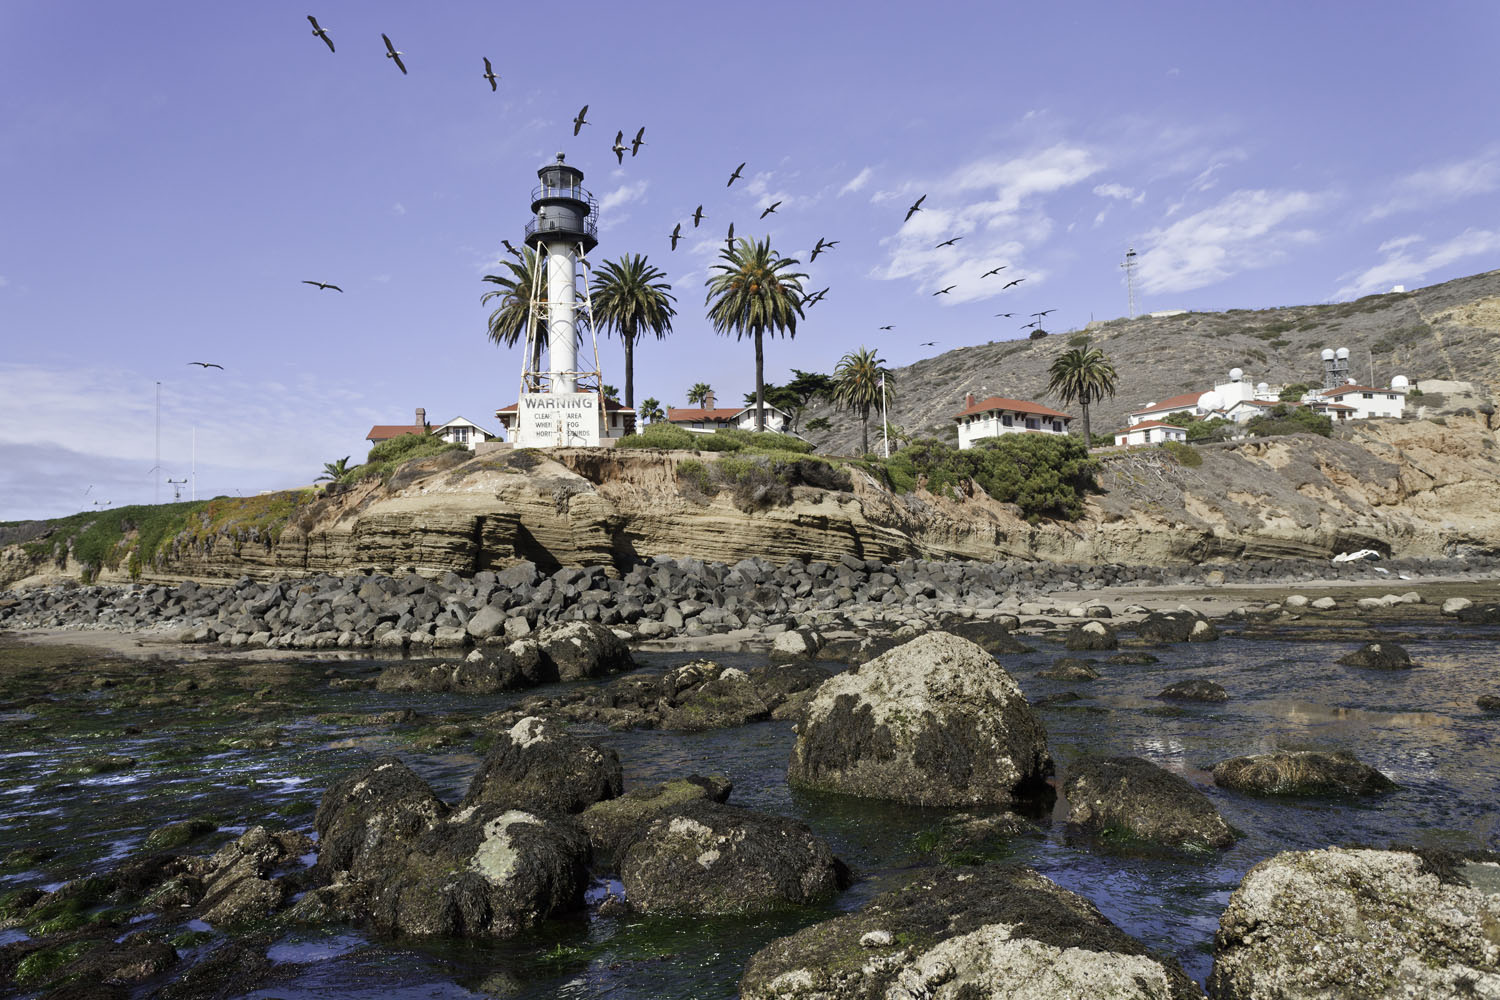 View of Pelican Point at Cabrillo